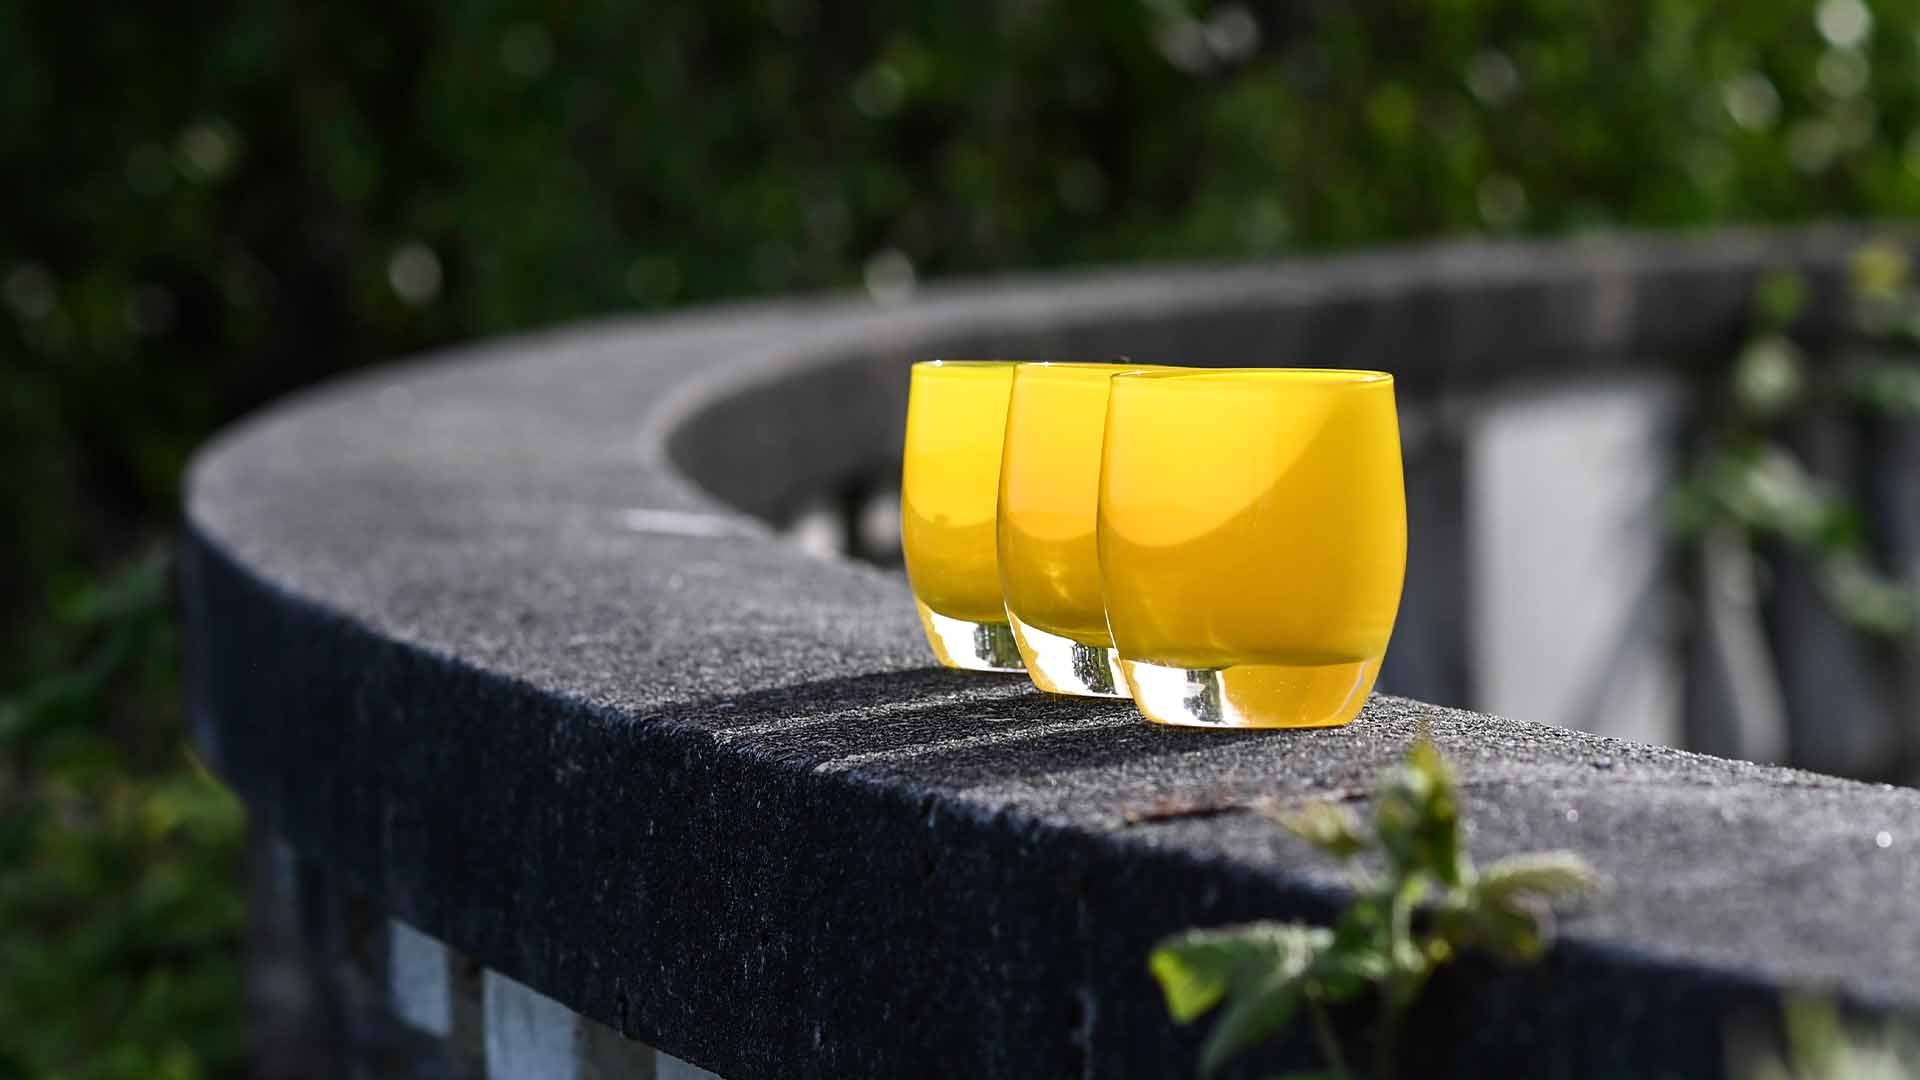 sunshine yellow basking on a stone wall in a garden. Hand-blown glass votive candle holder.